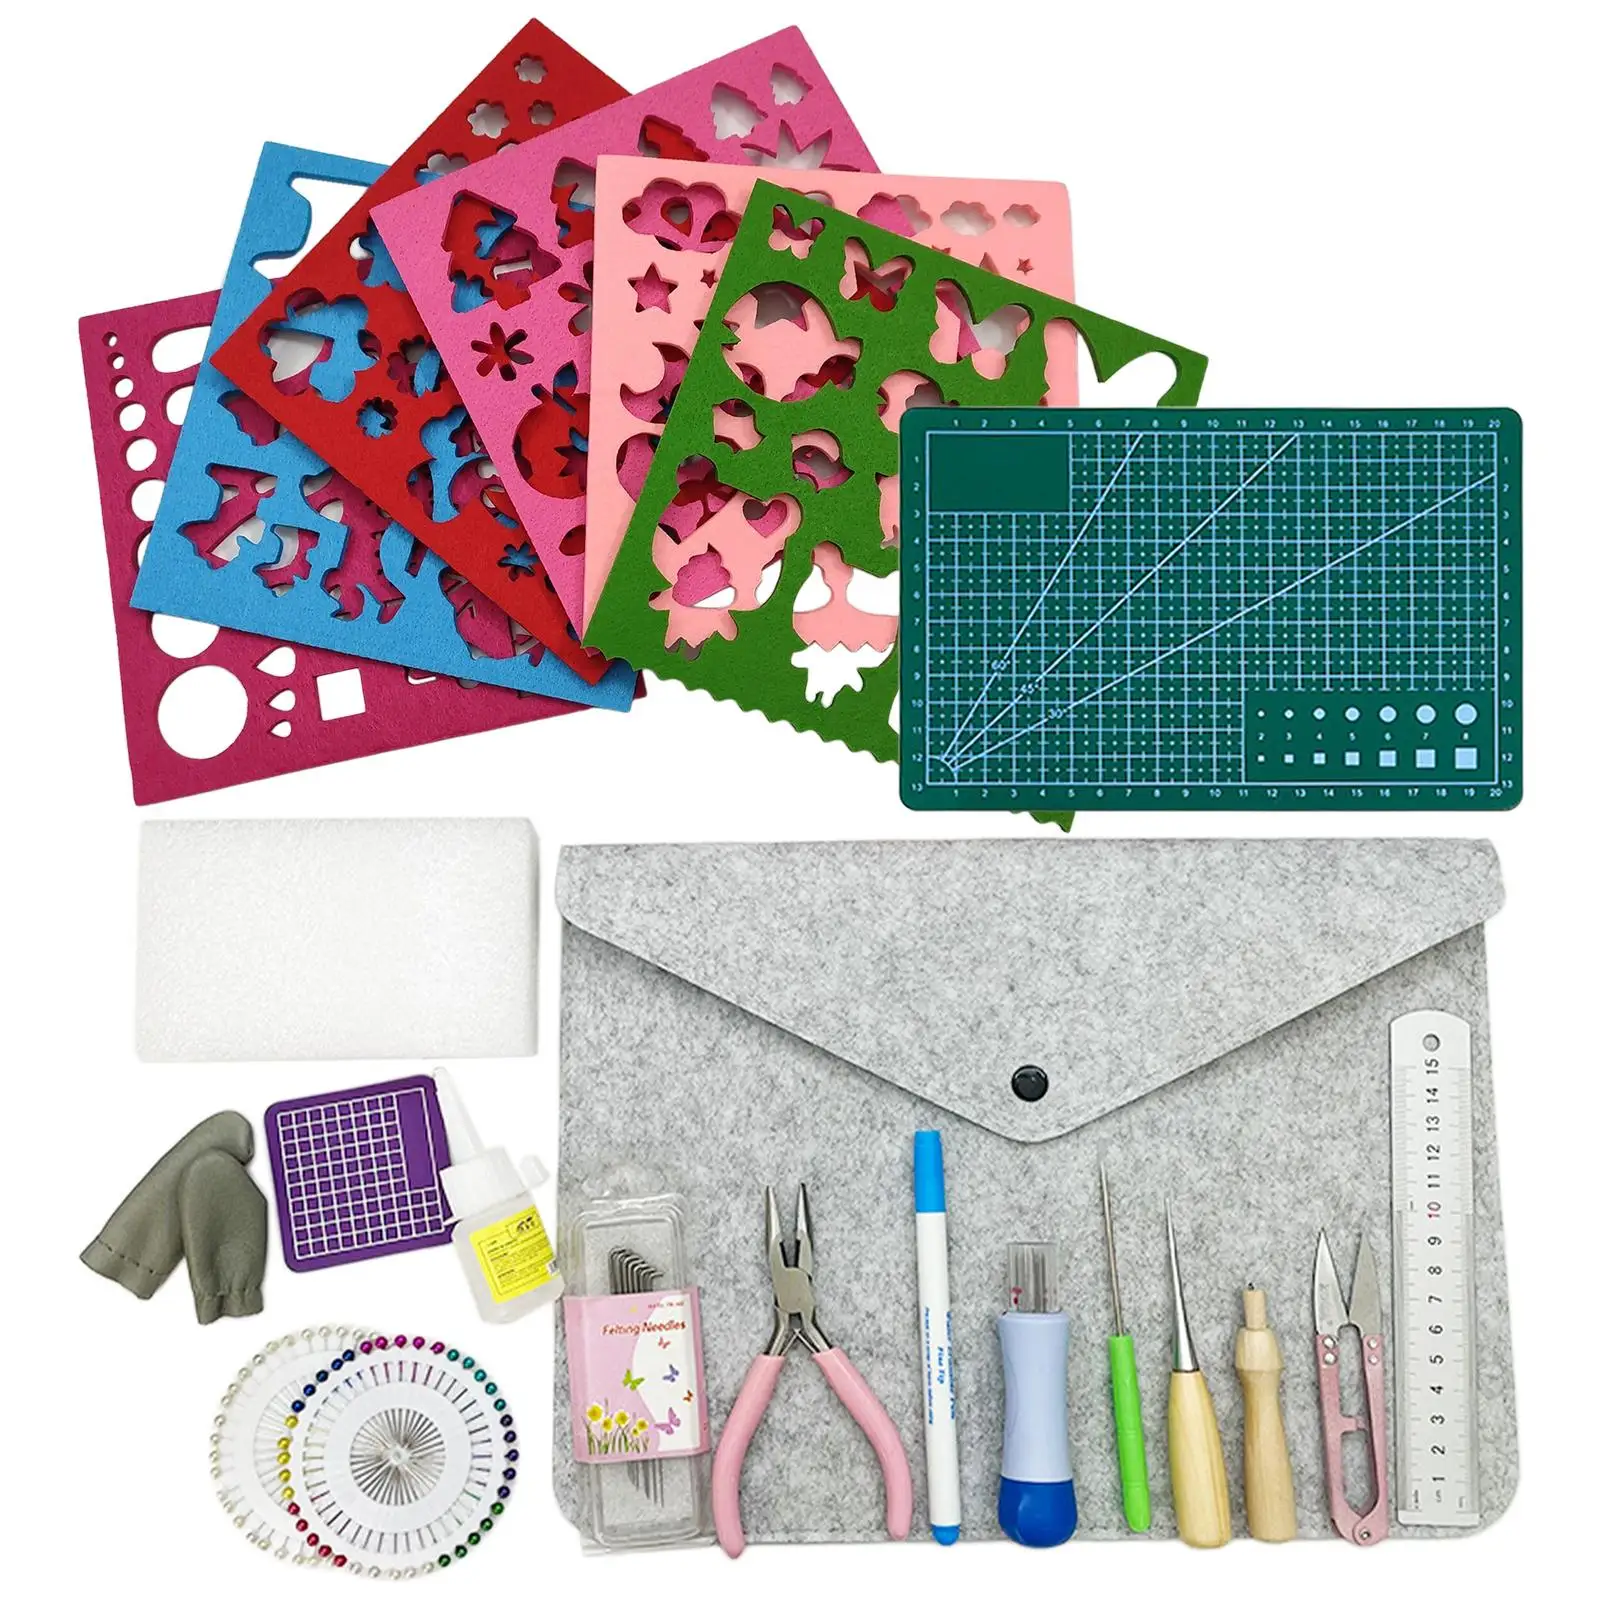 24 Pieces DIY Suit with7 Poking Models Wooden Needle Felting Kit for Starter